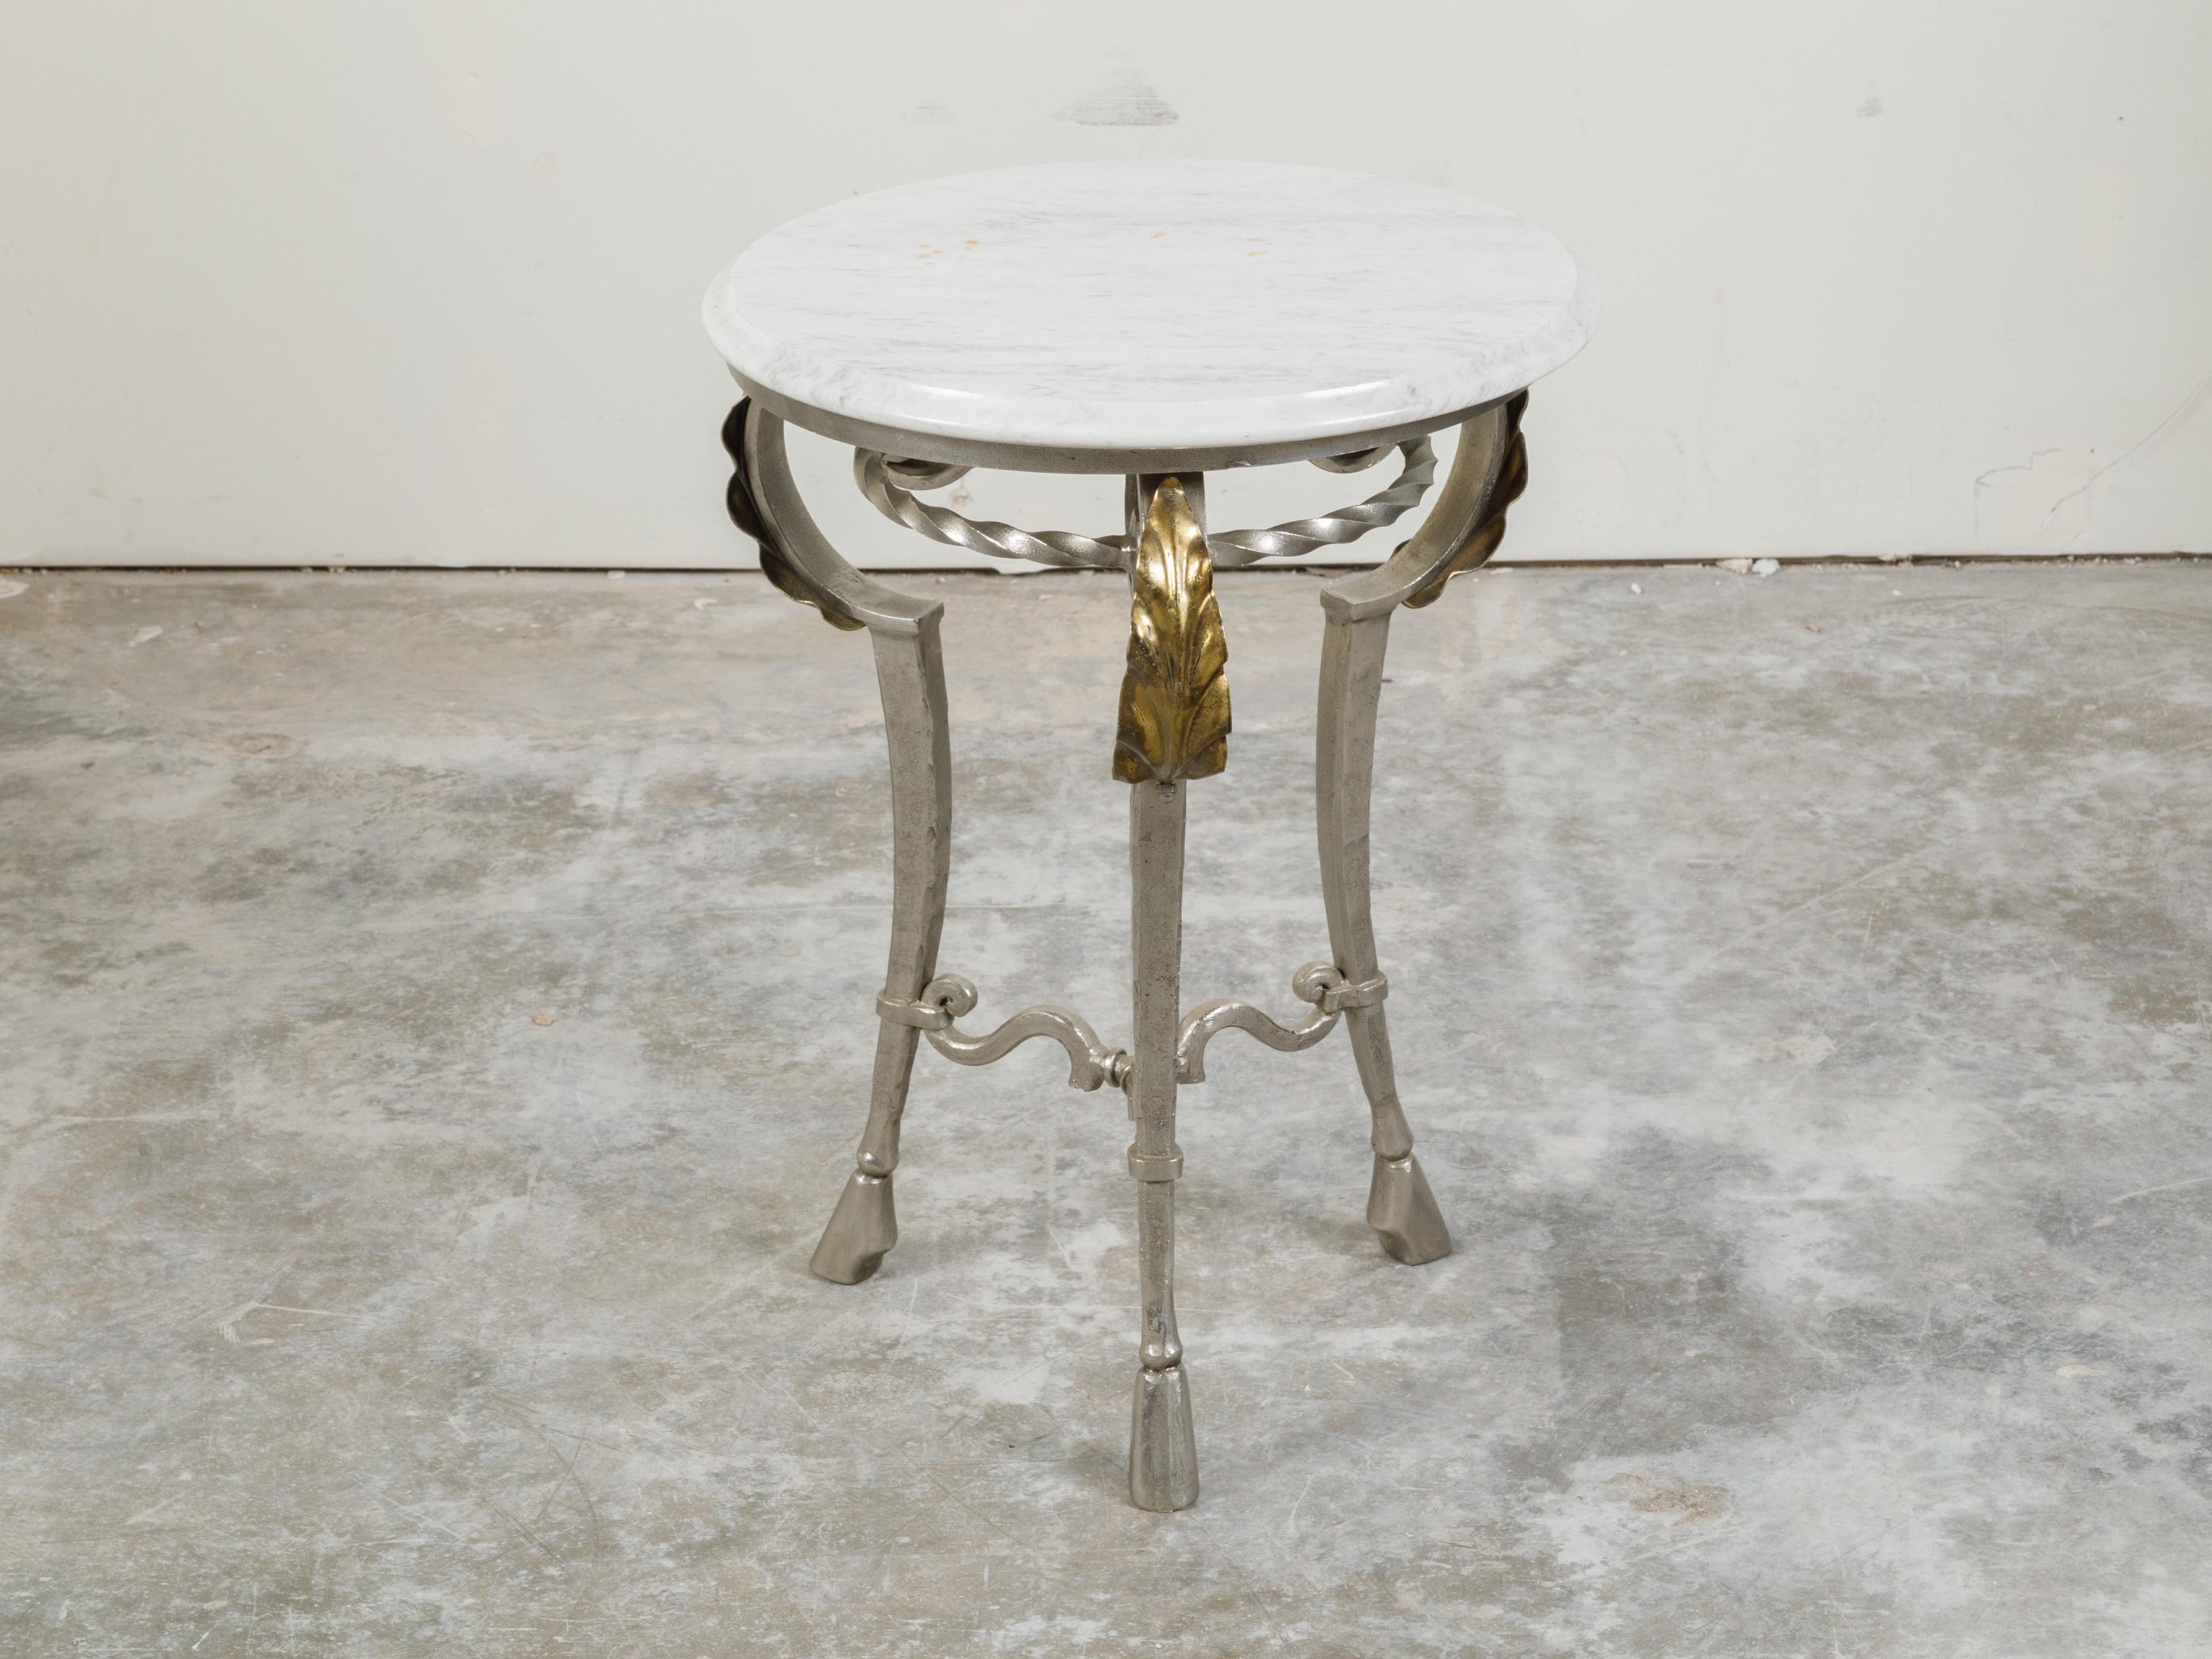 Italian Midcentury Steel Side Table with Circular White Marble Top and Hoof Feet For Sale 1